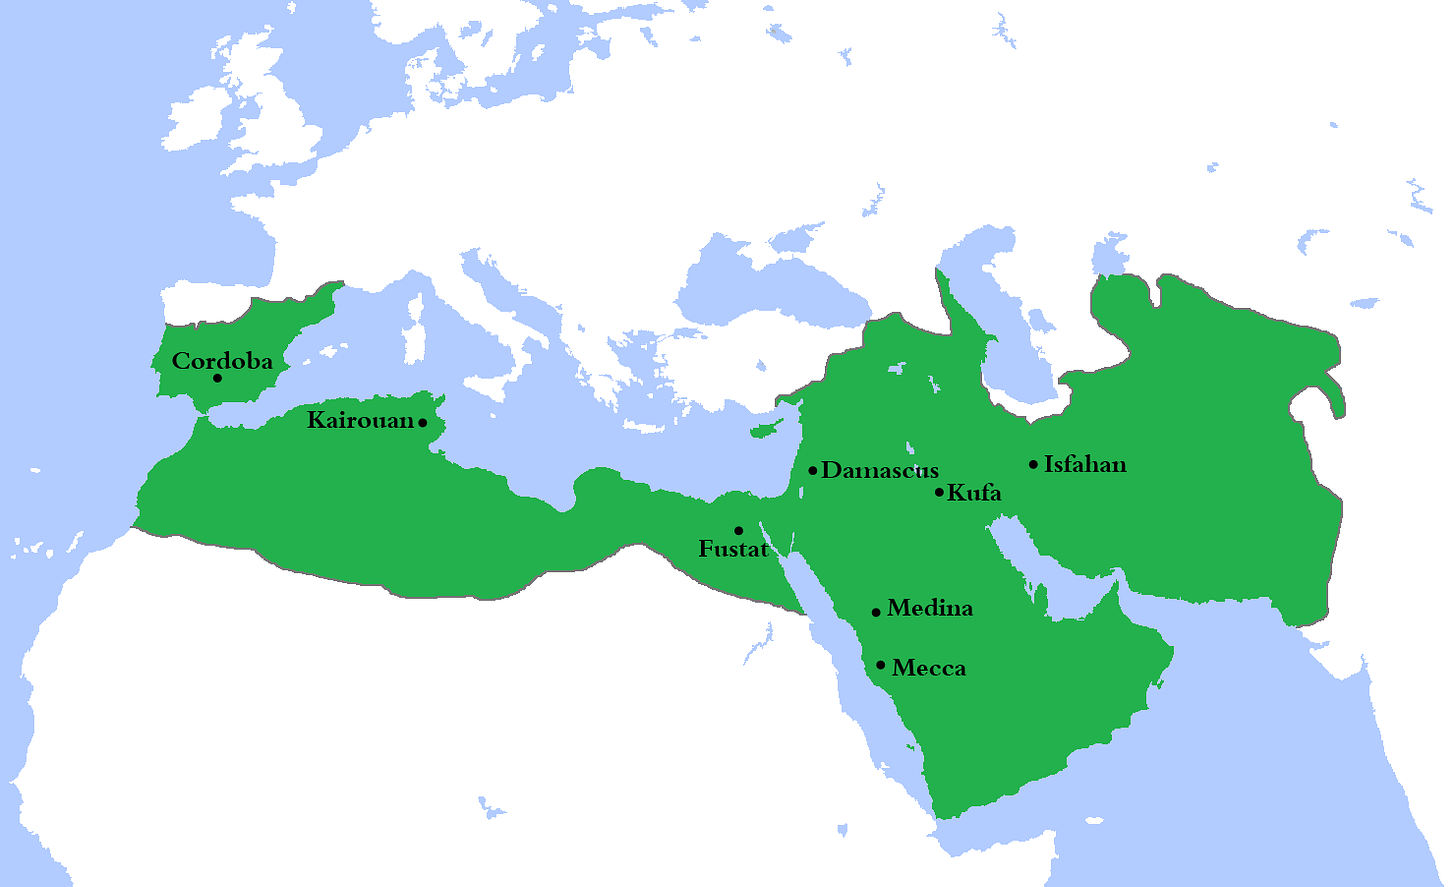 This map shows the extent of the Umayyad Empire in 750 CE